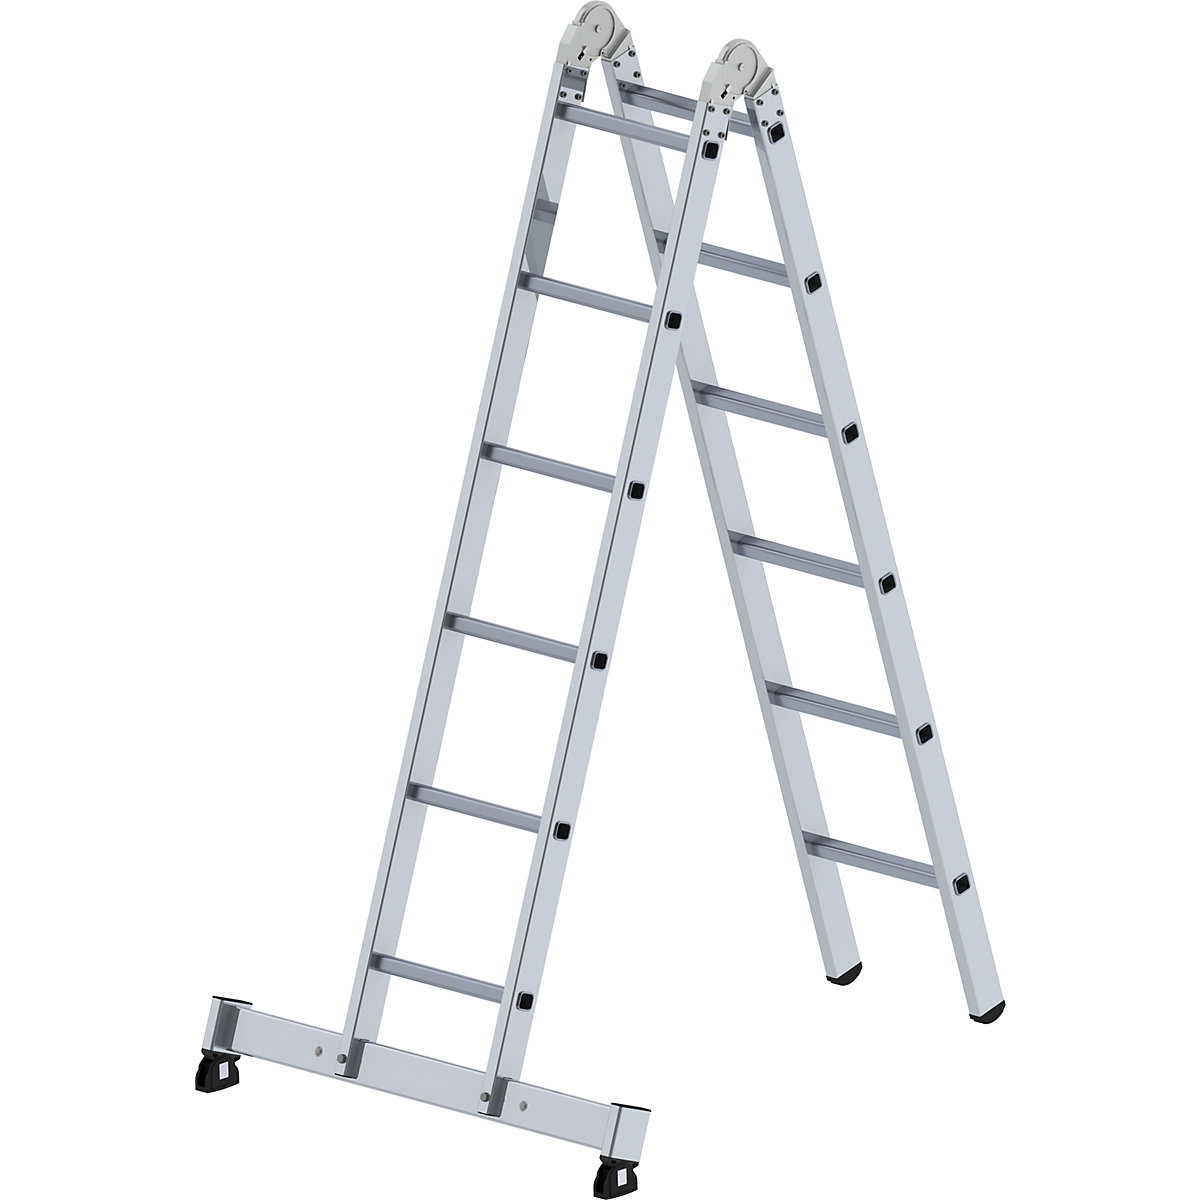 Aluminium folding ladder – MUNK, can be used as step or lean-to ladder, 2 x 6 rungs-4